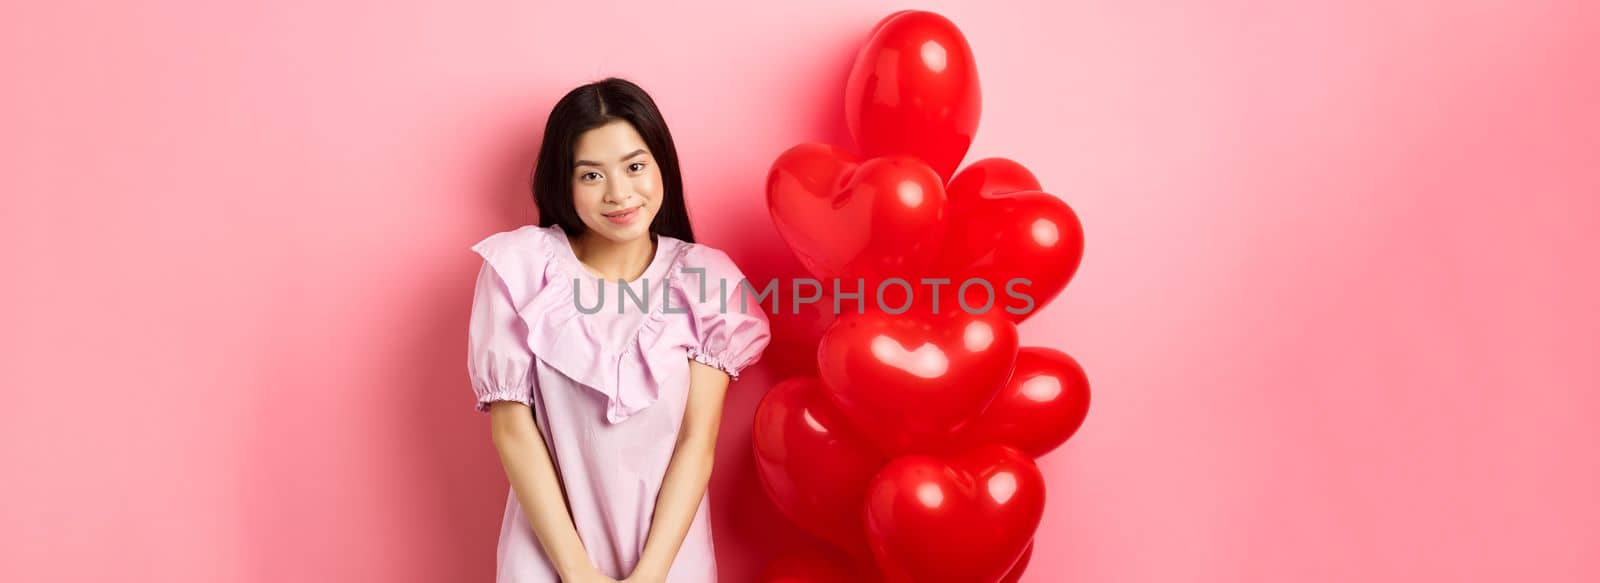 Cute asian girl in dress looking shy and smiling, standing modest near valentines day balloons, blushing on romantic date, looking at camera, pink background.